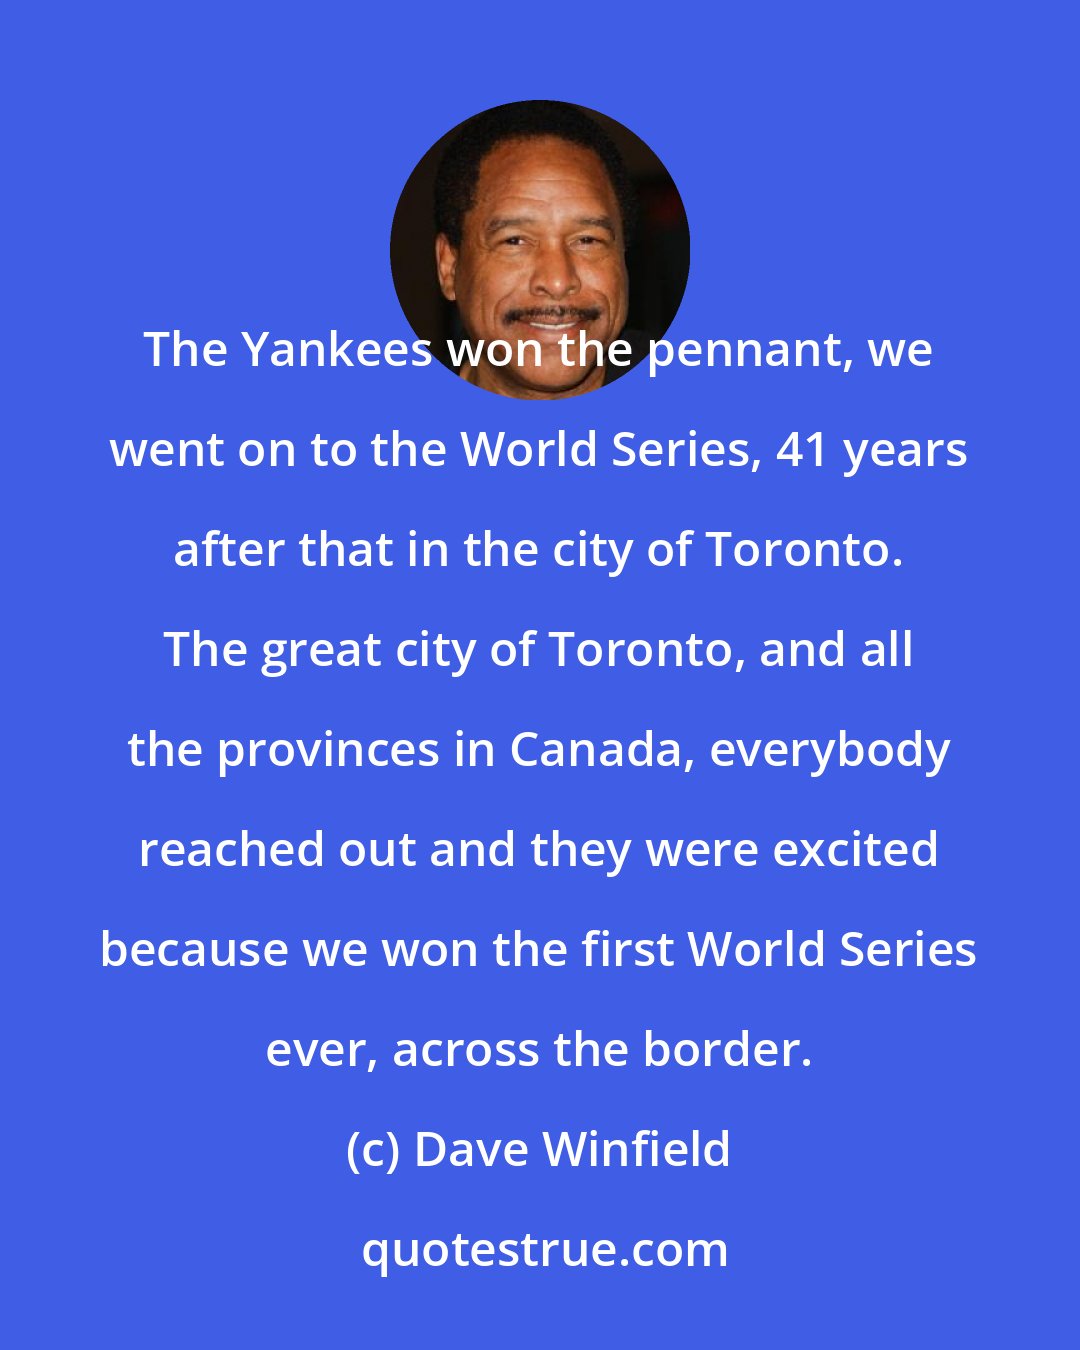 Dave Winfield: The Yankees won the pennant, we went on to the World Series, 41 years after that in the city of Toronto. The great city of Toronto, and all the provinces in Canada, everybody reached out and they were excited because we won the first World Series ever, across the border.